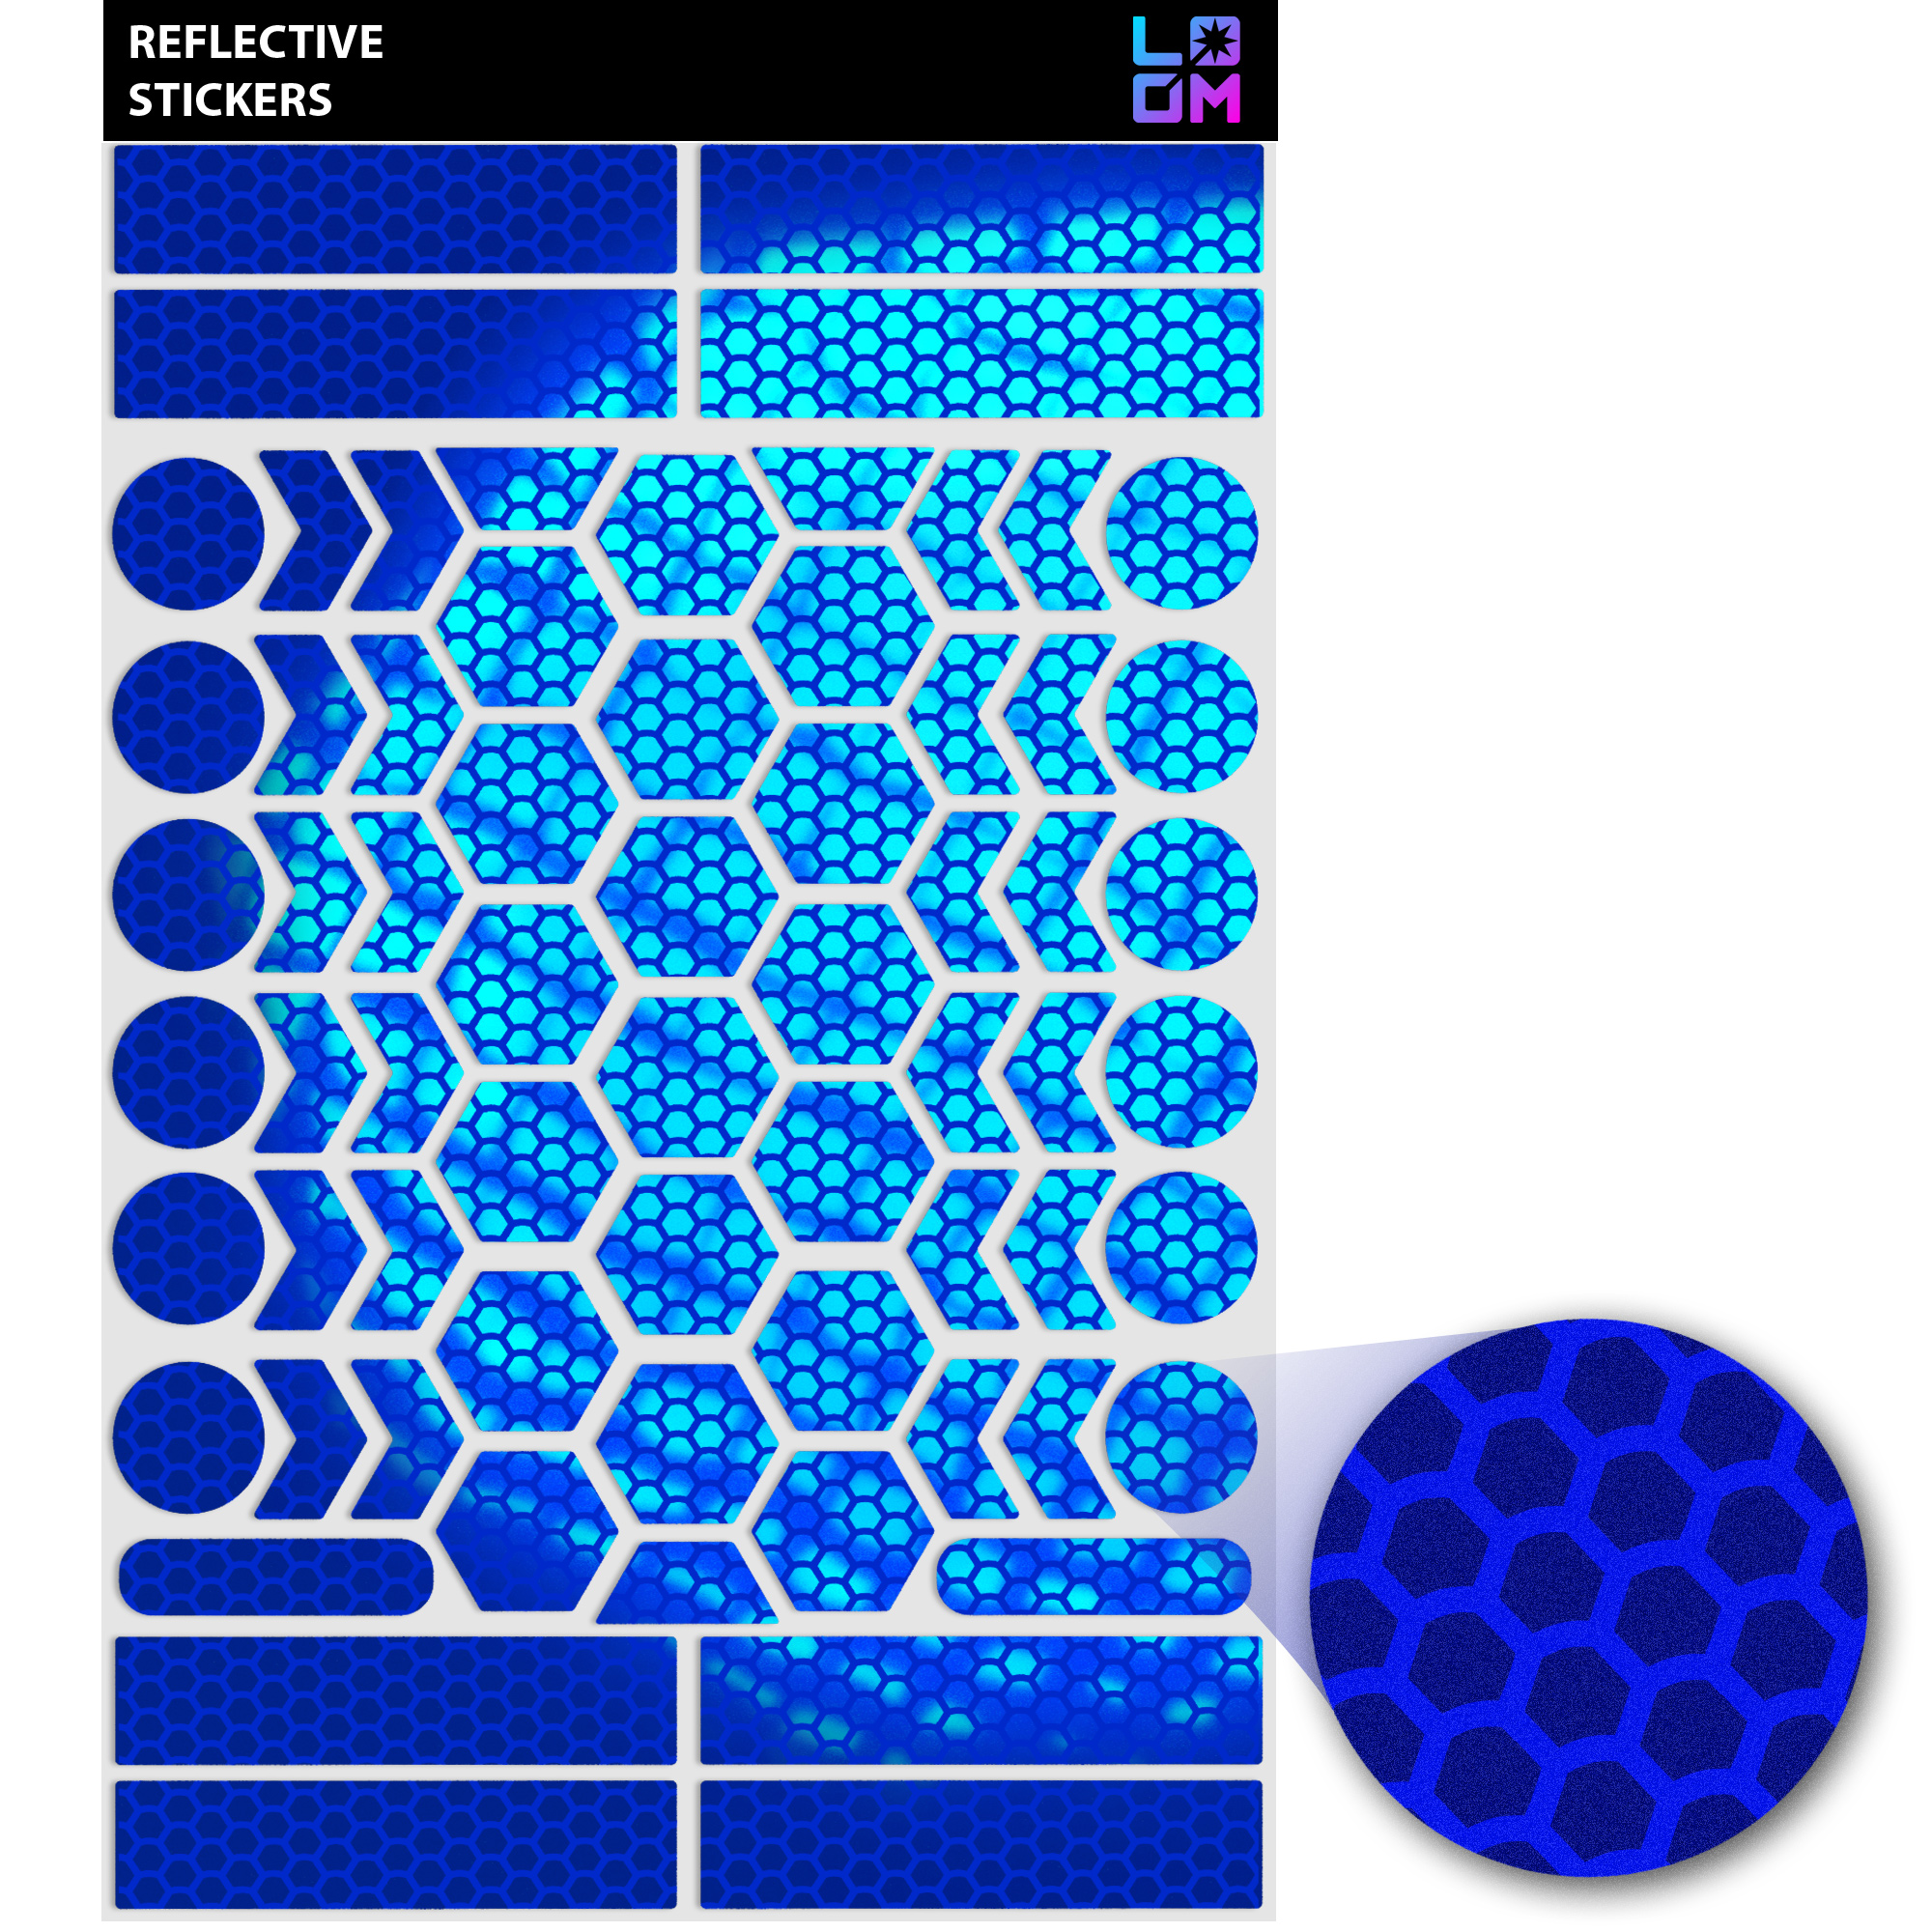 Figure stickers, blue, highly reflective